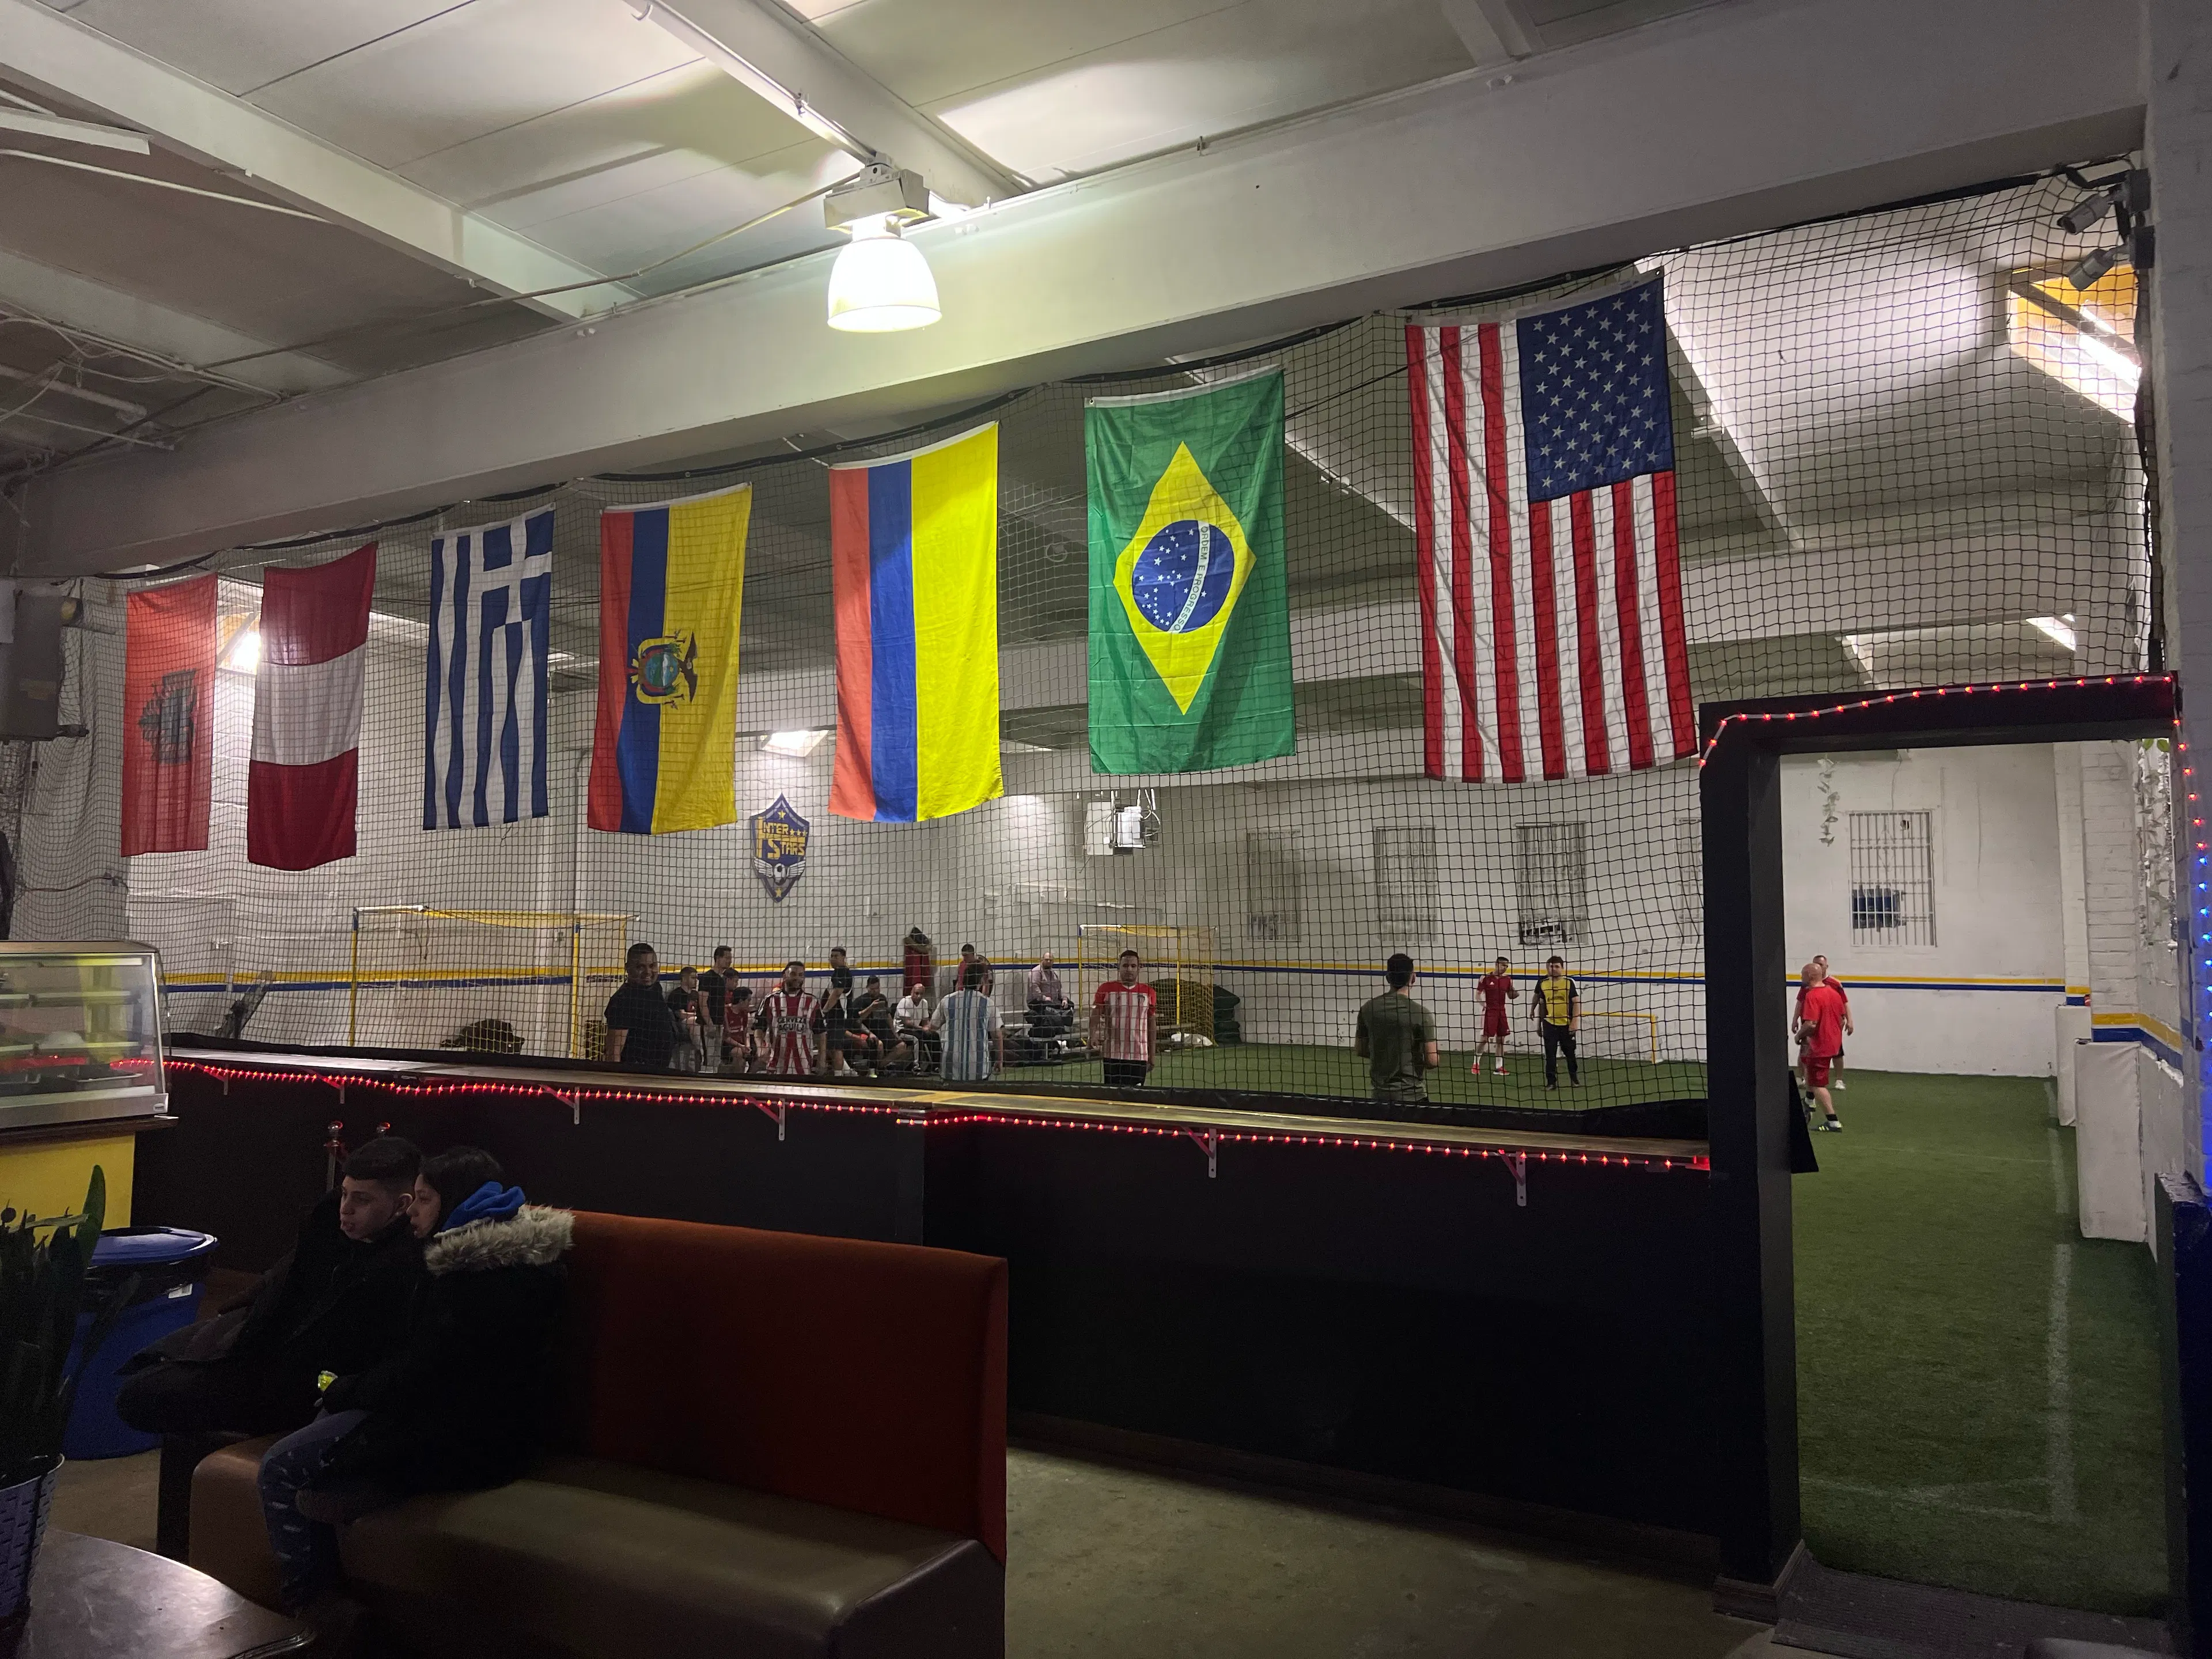 An indoor soccer field with a viewing room right next to the pitch!